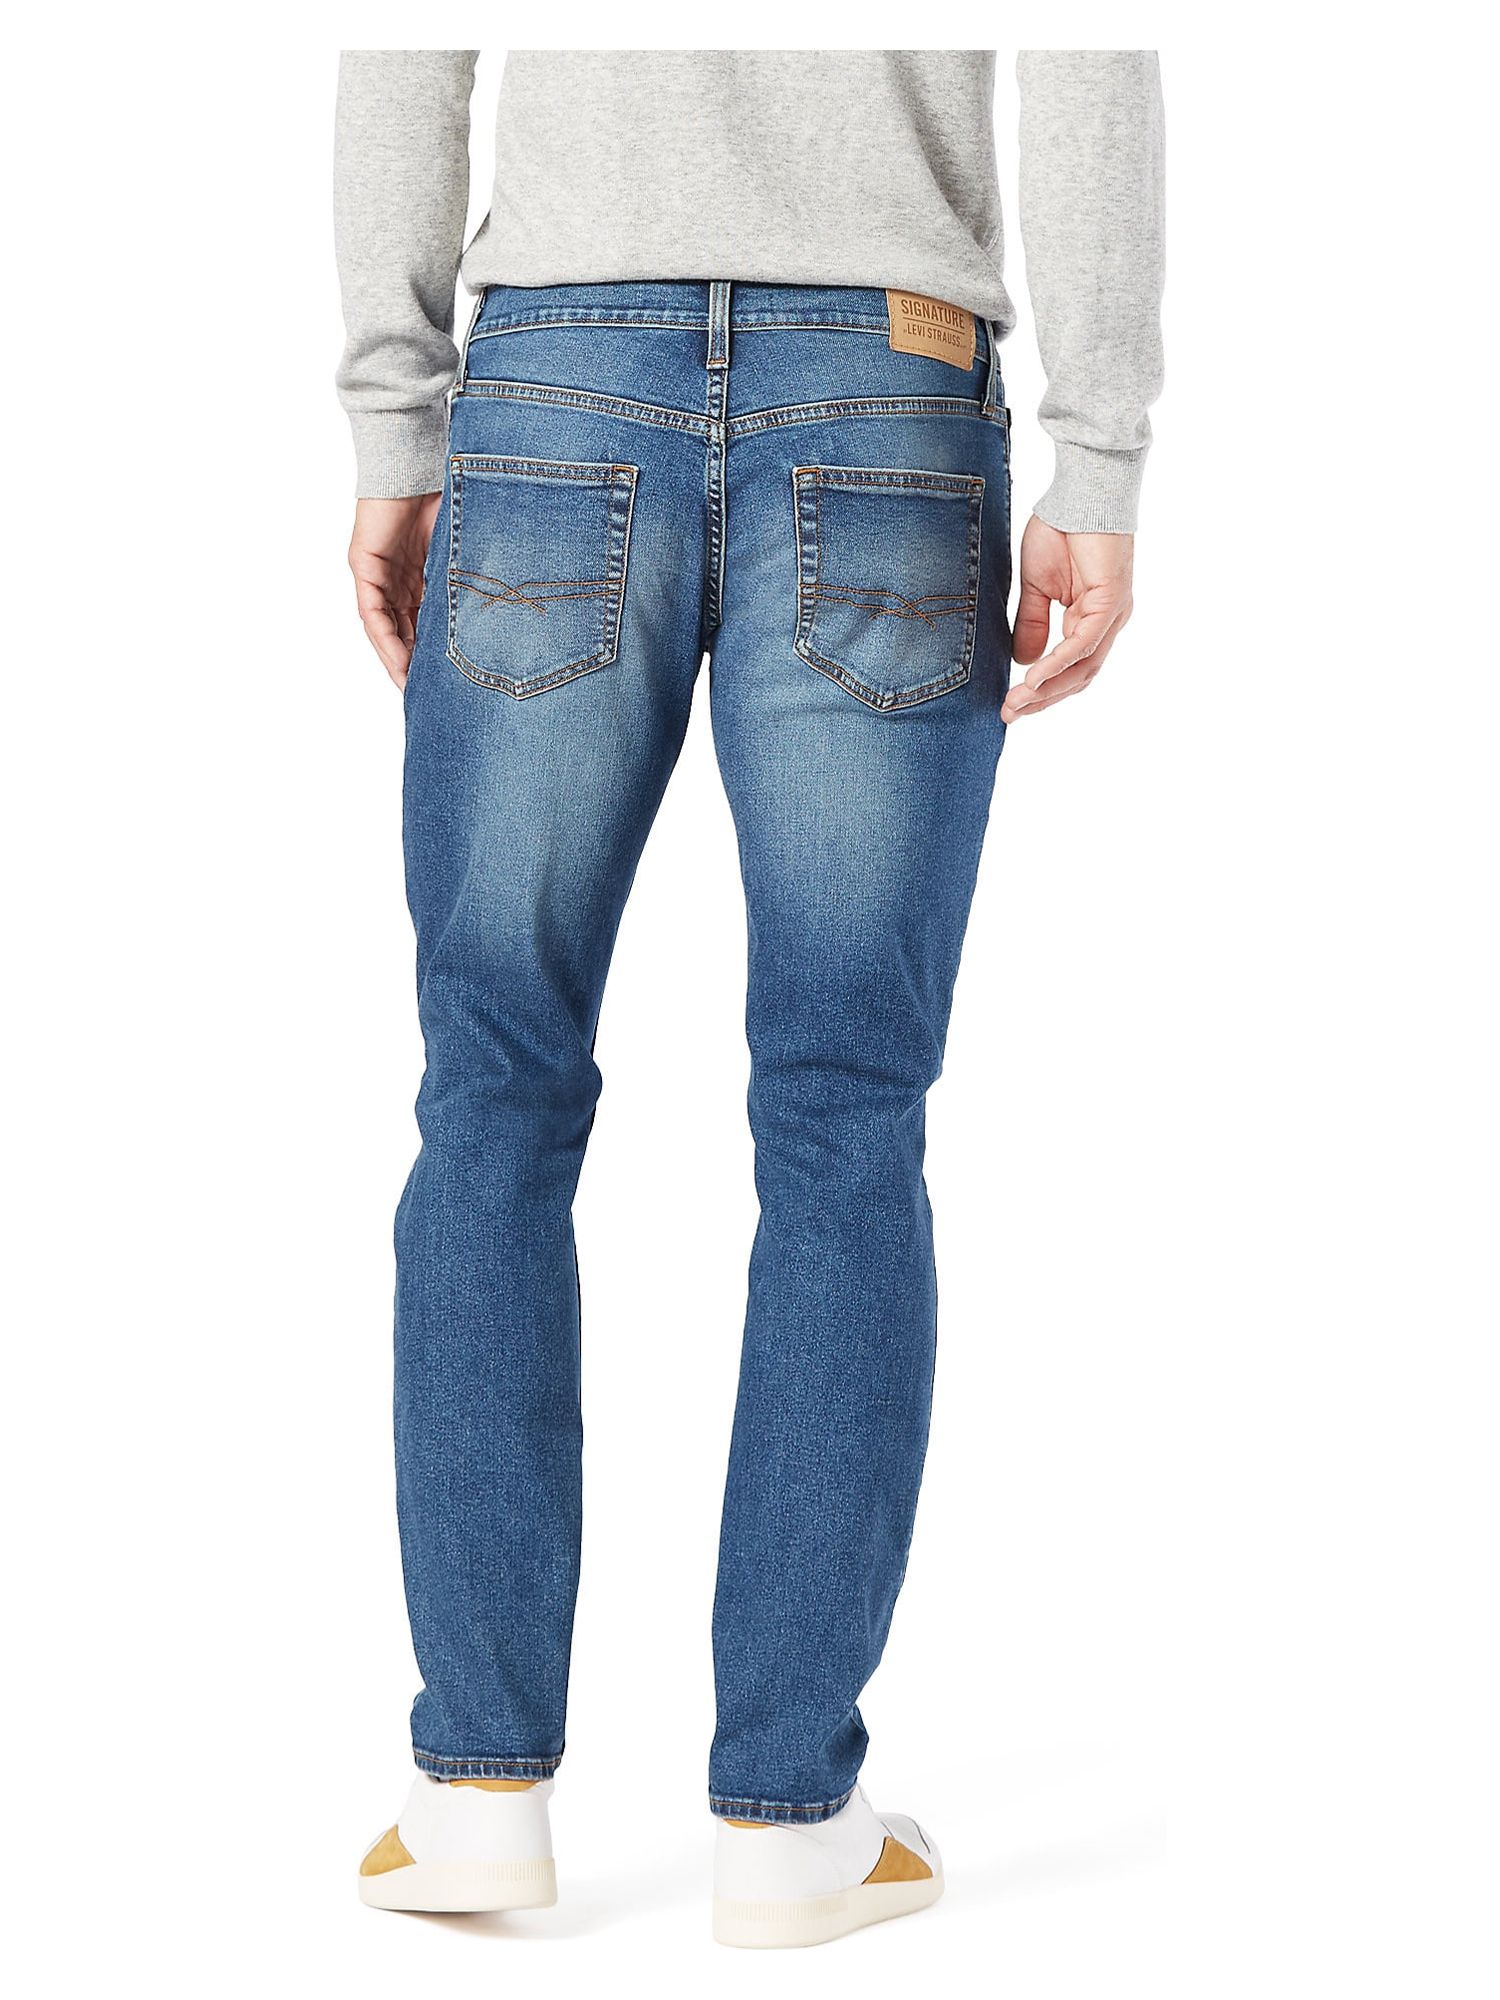 Signature by Levi Strauss & Co. Men’s and Big and Tall Slim Fit Jeans - image 3 of 6